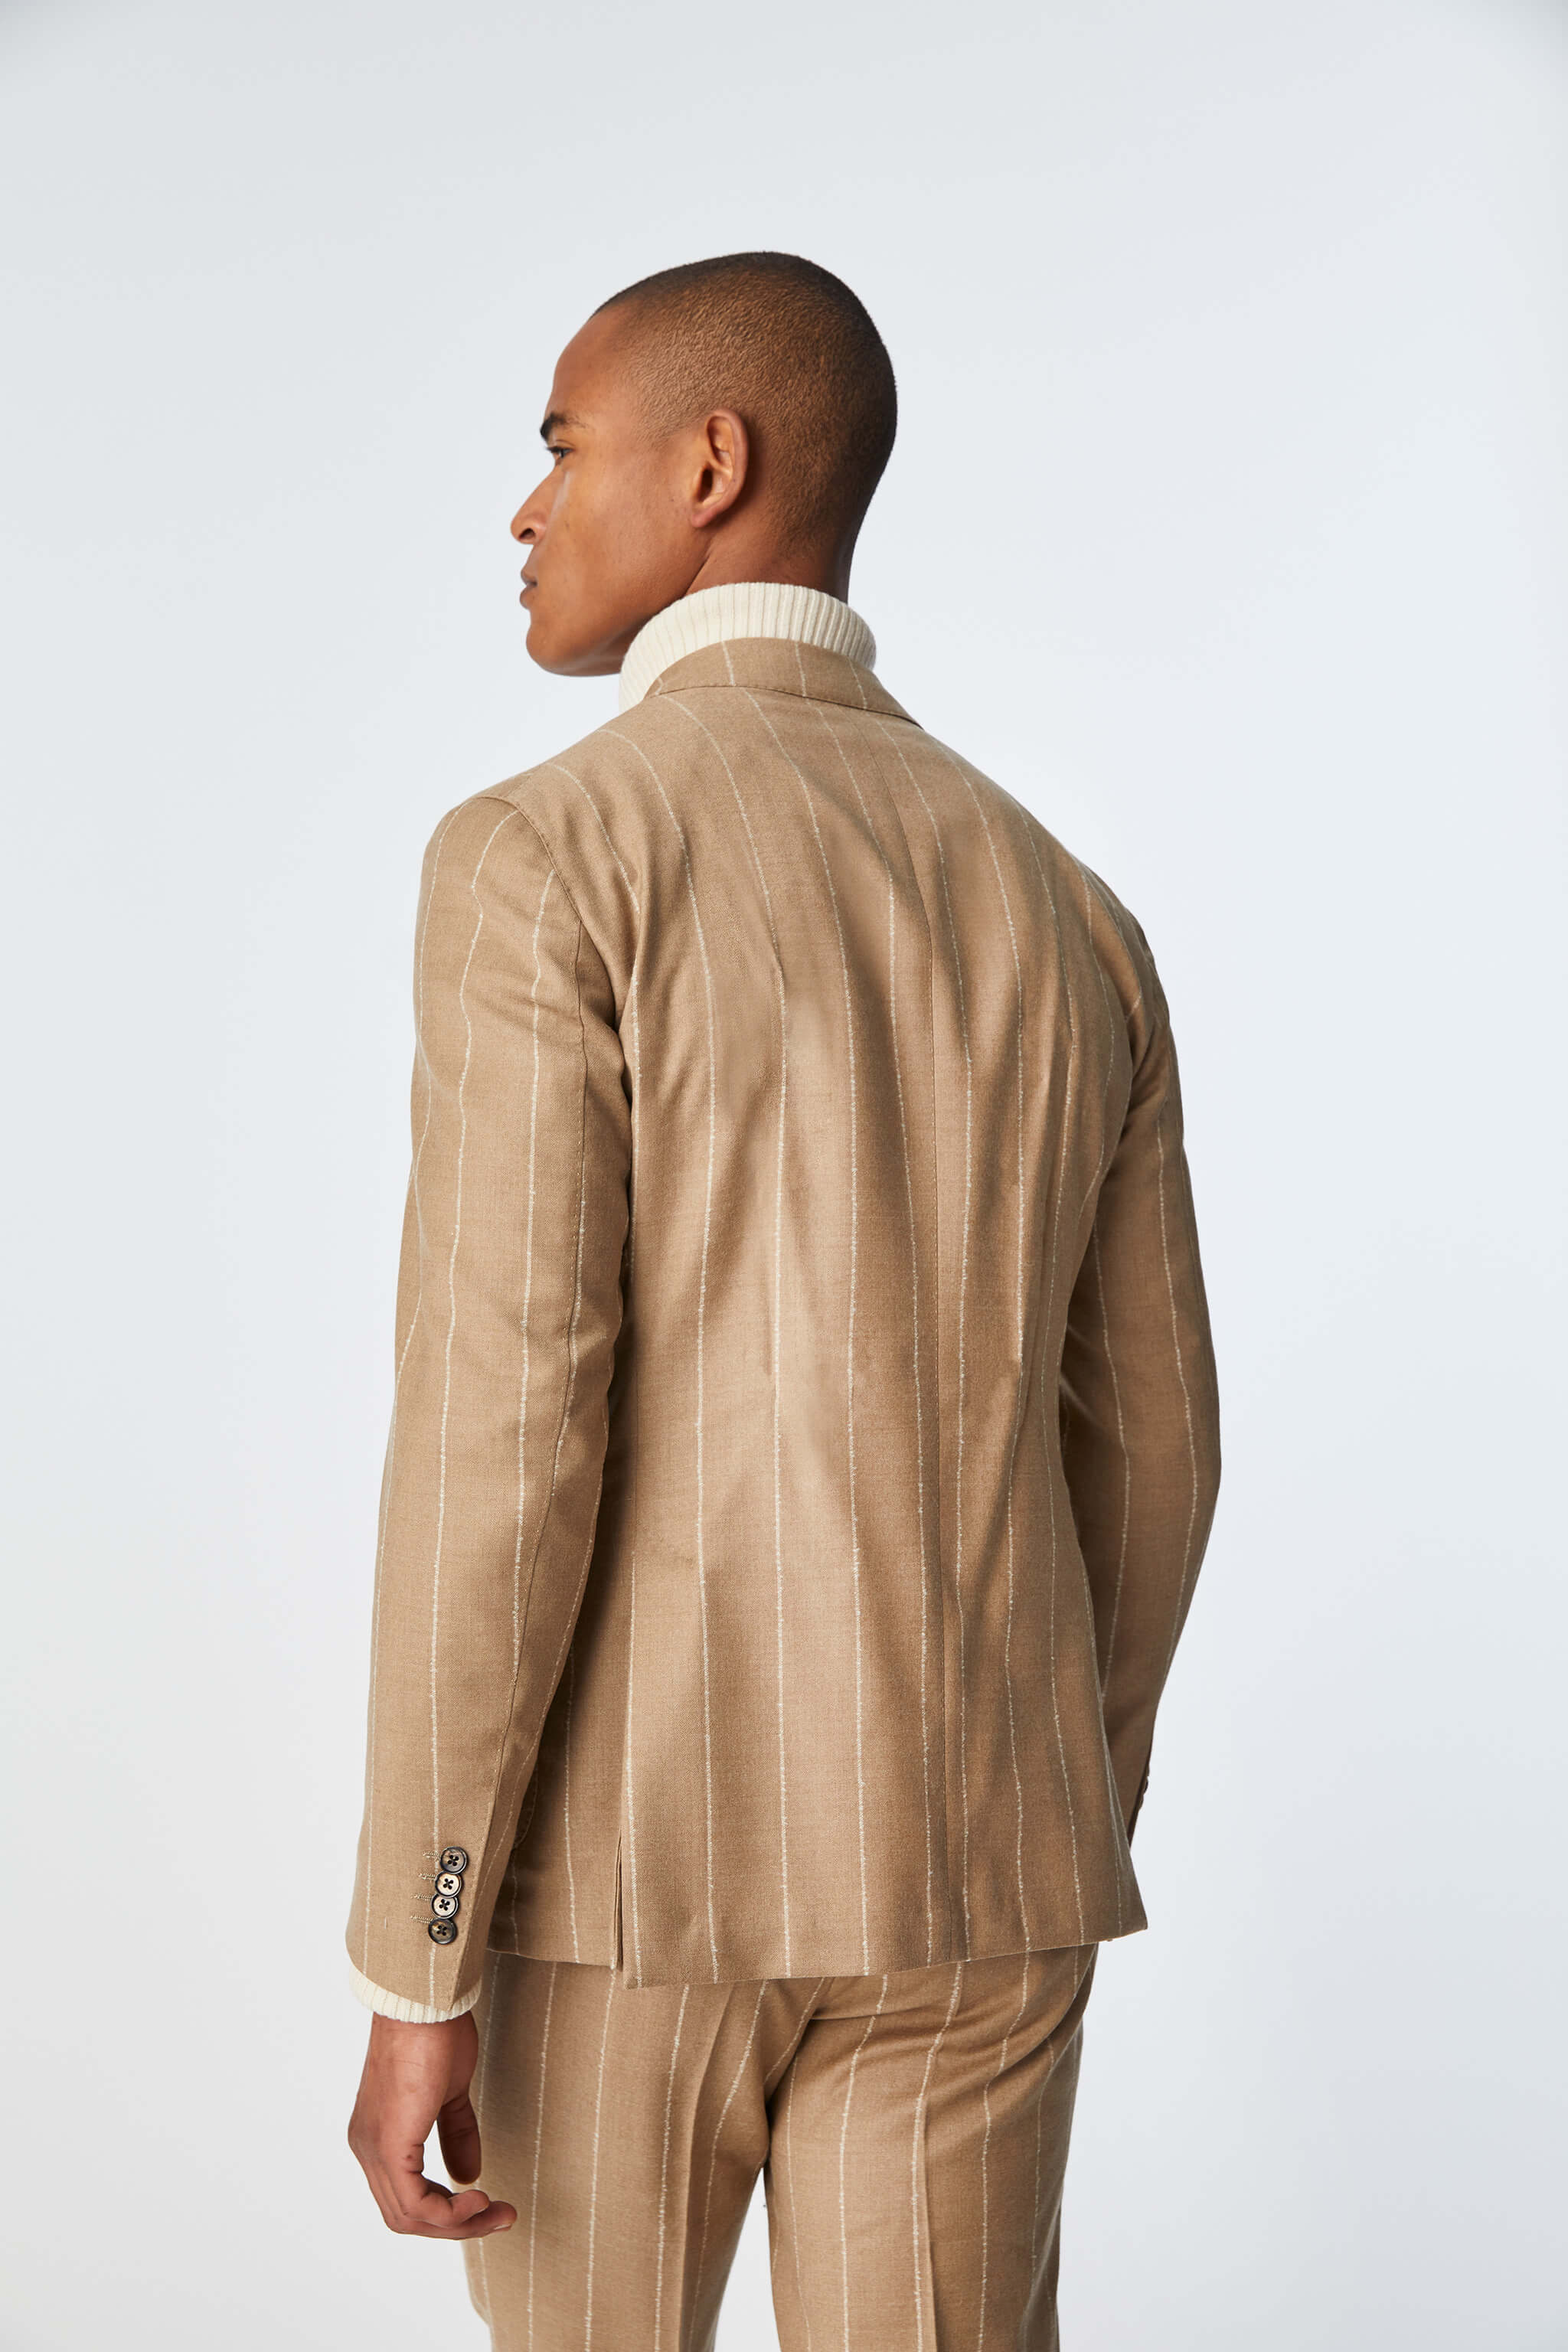 Garment-dyed Tom suit in beige